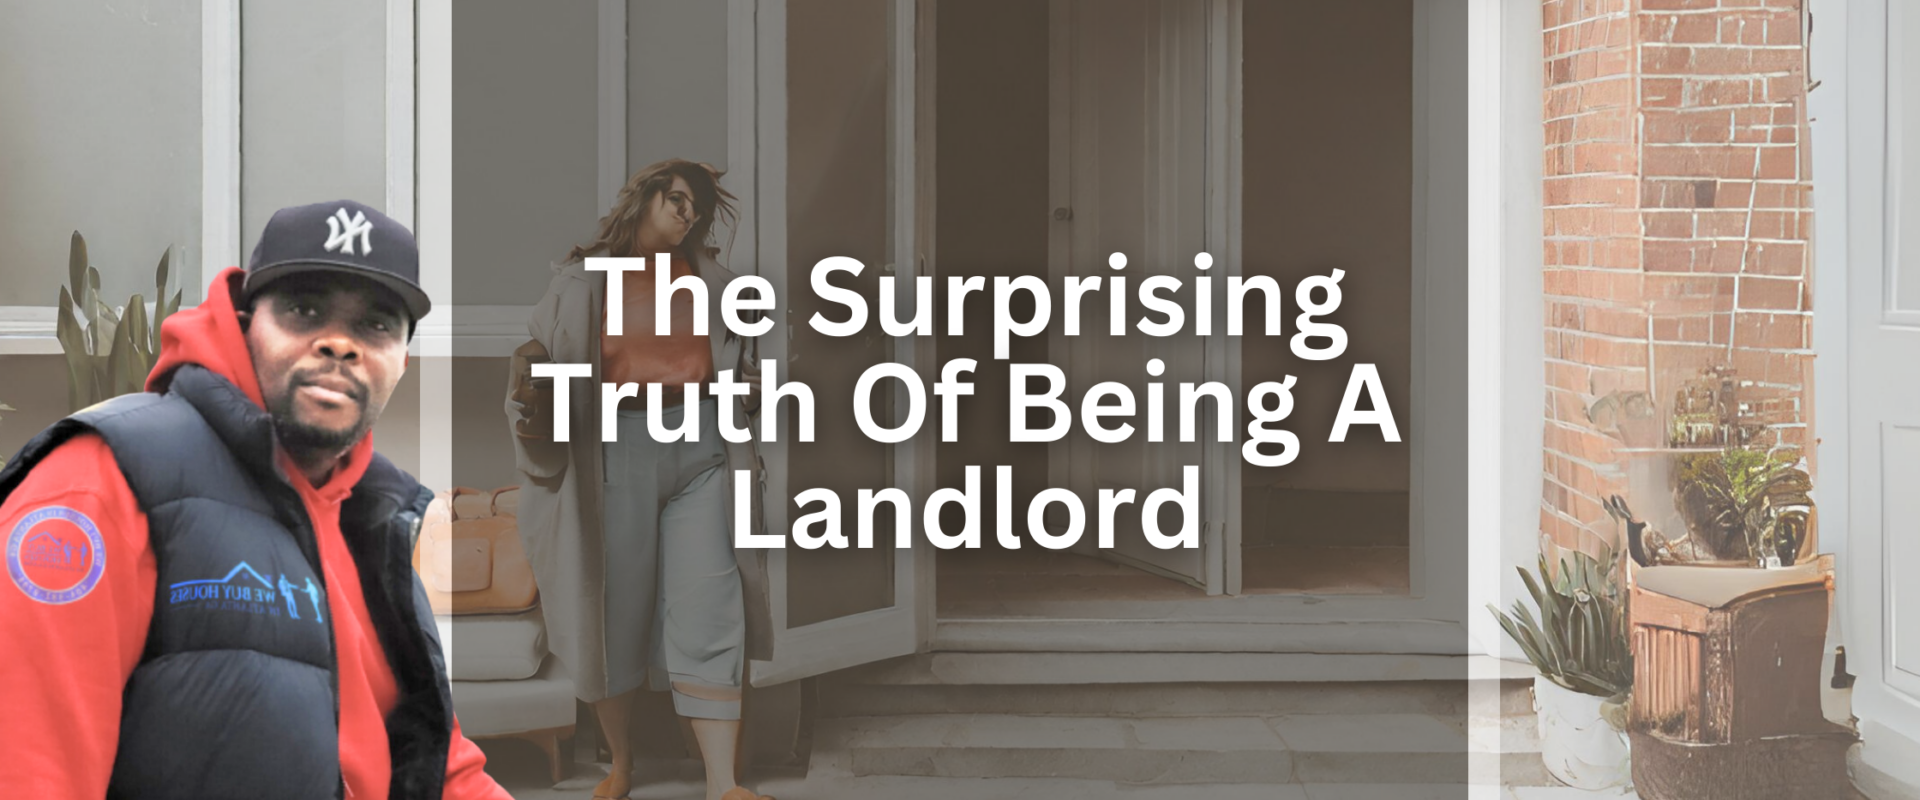 The-Surprising-Truth-Of-Being-A-Landlord-1